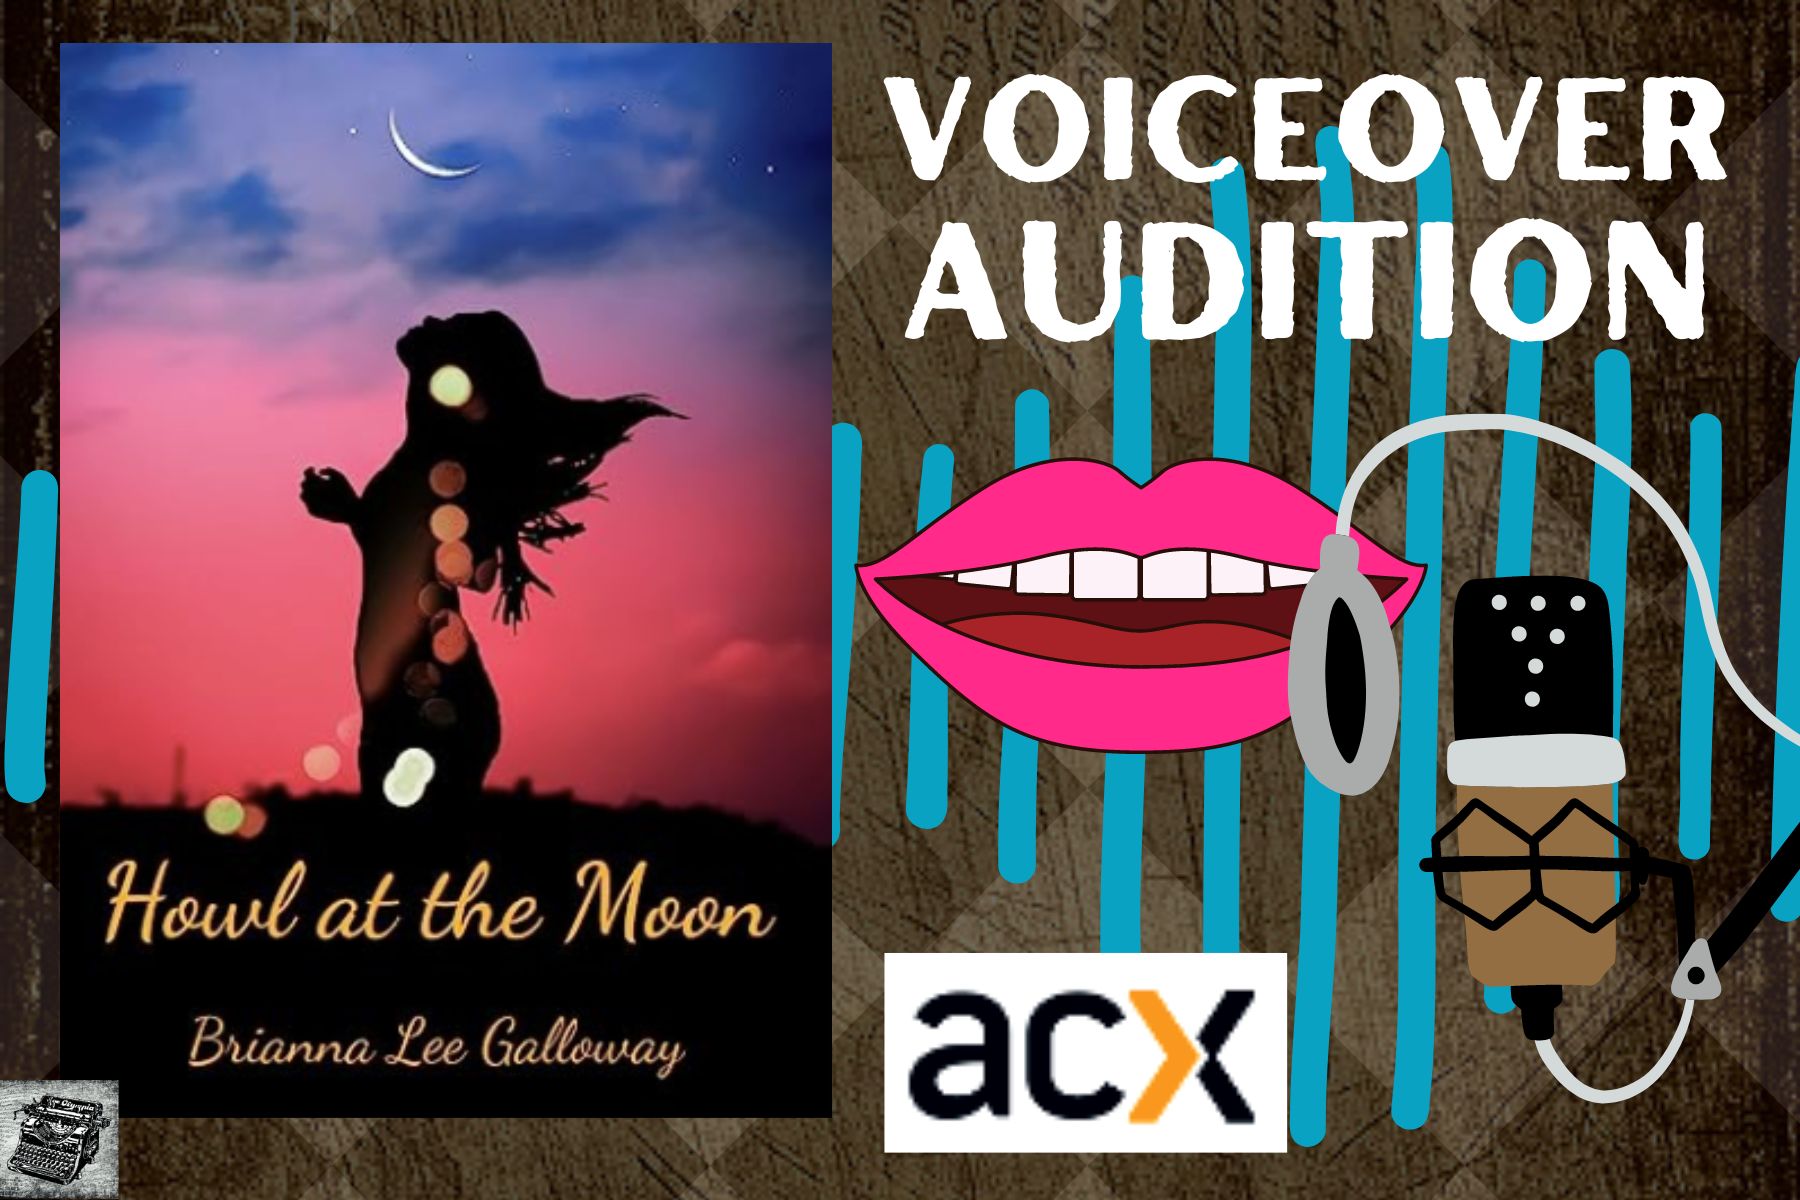  ACX Voiceover Audio Audition and Transcript for Howl At The Moon by Brianna Lee Galloway